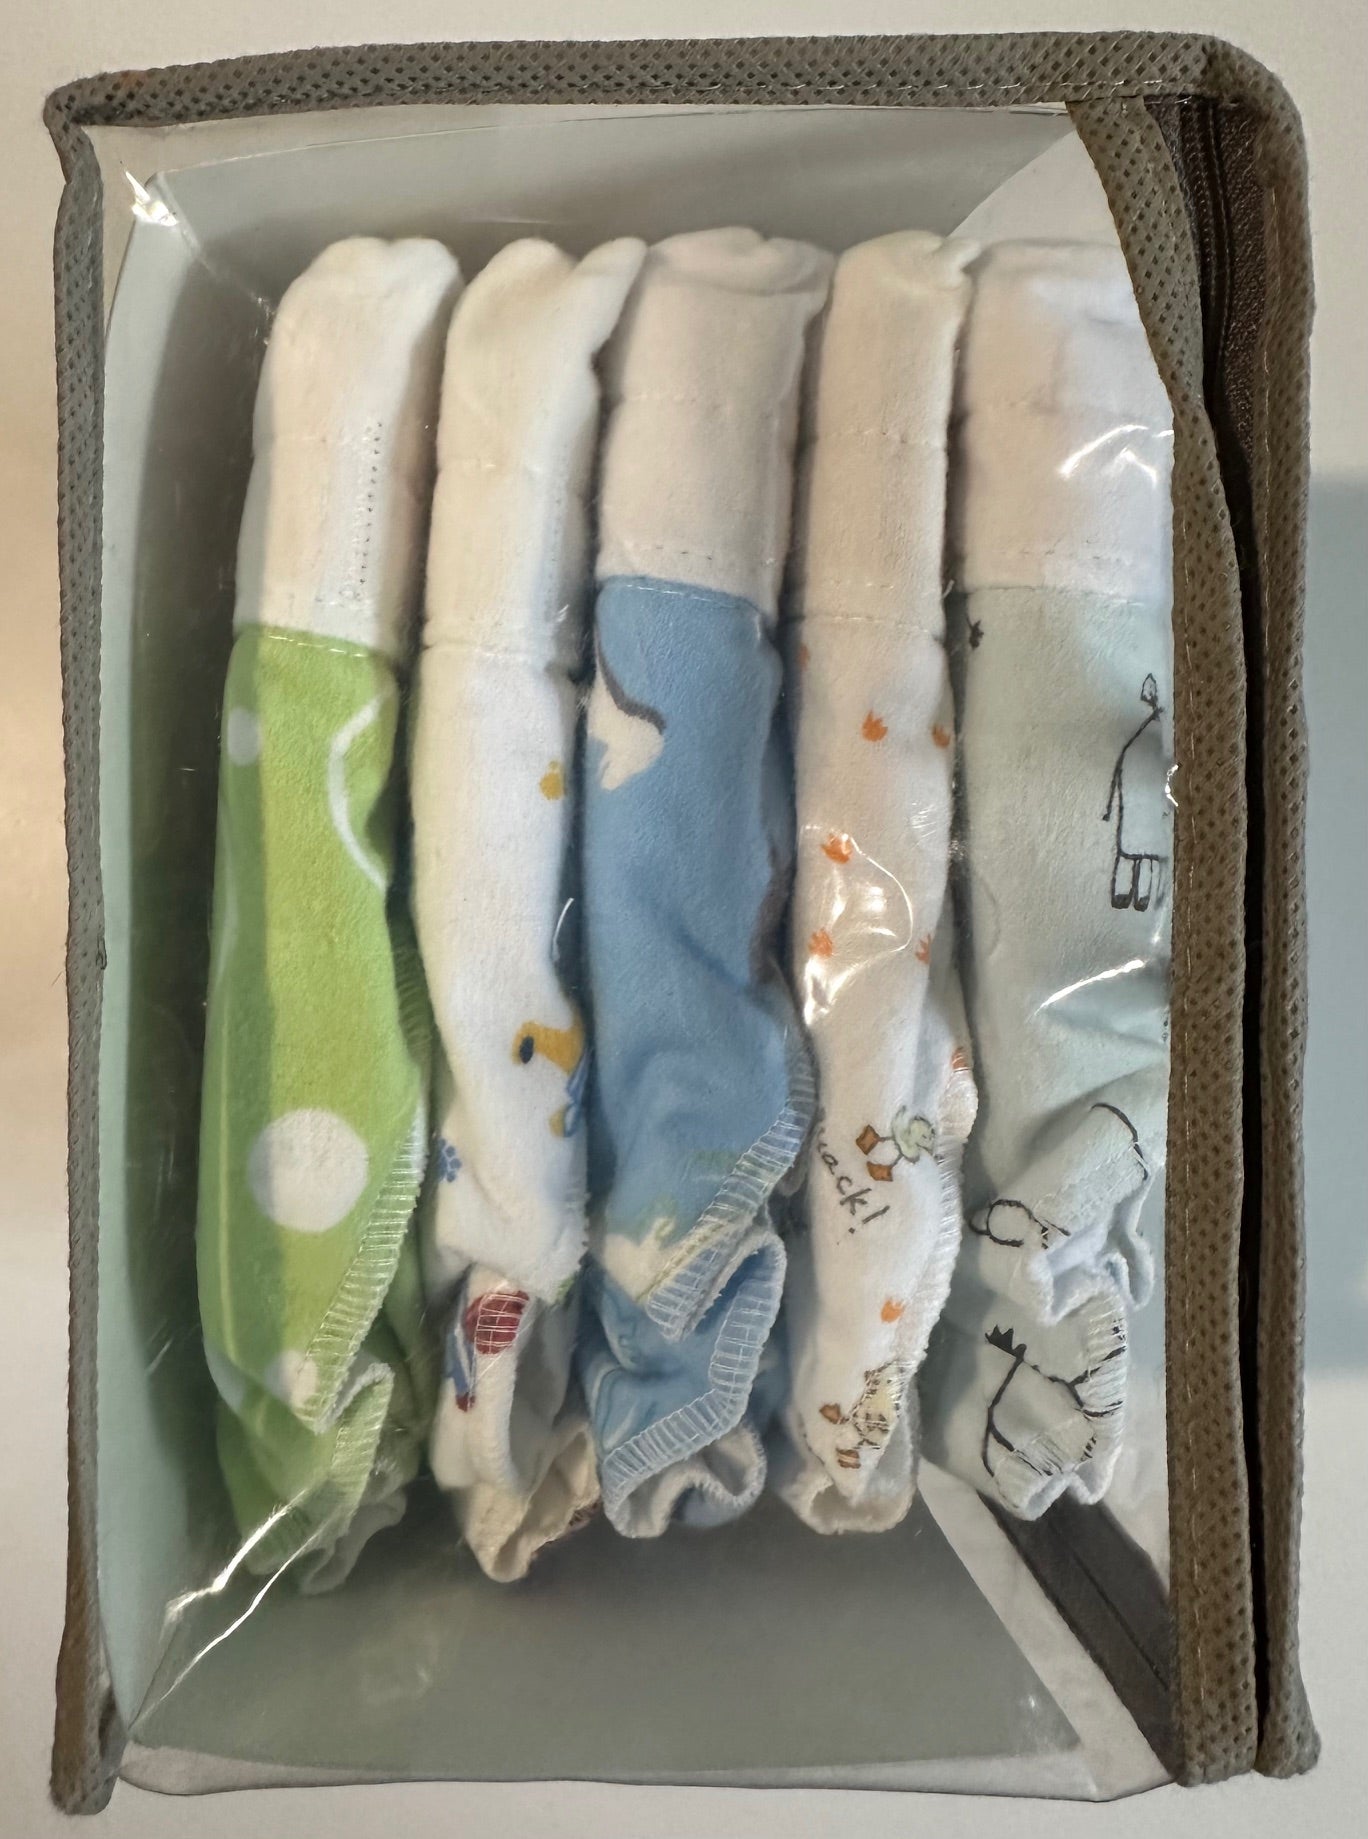 *New* Kushies, Pack of 5 Washable Diapers - 10-22 Lbs.